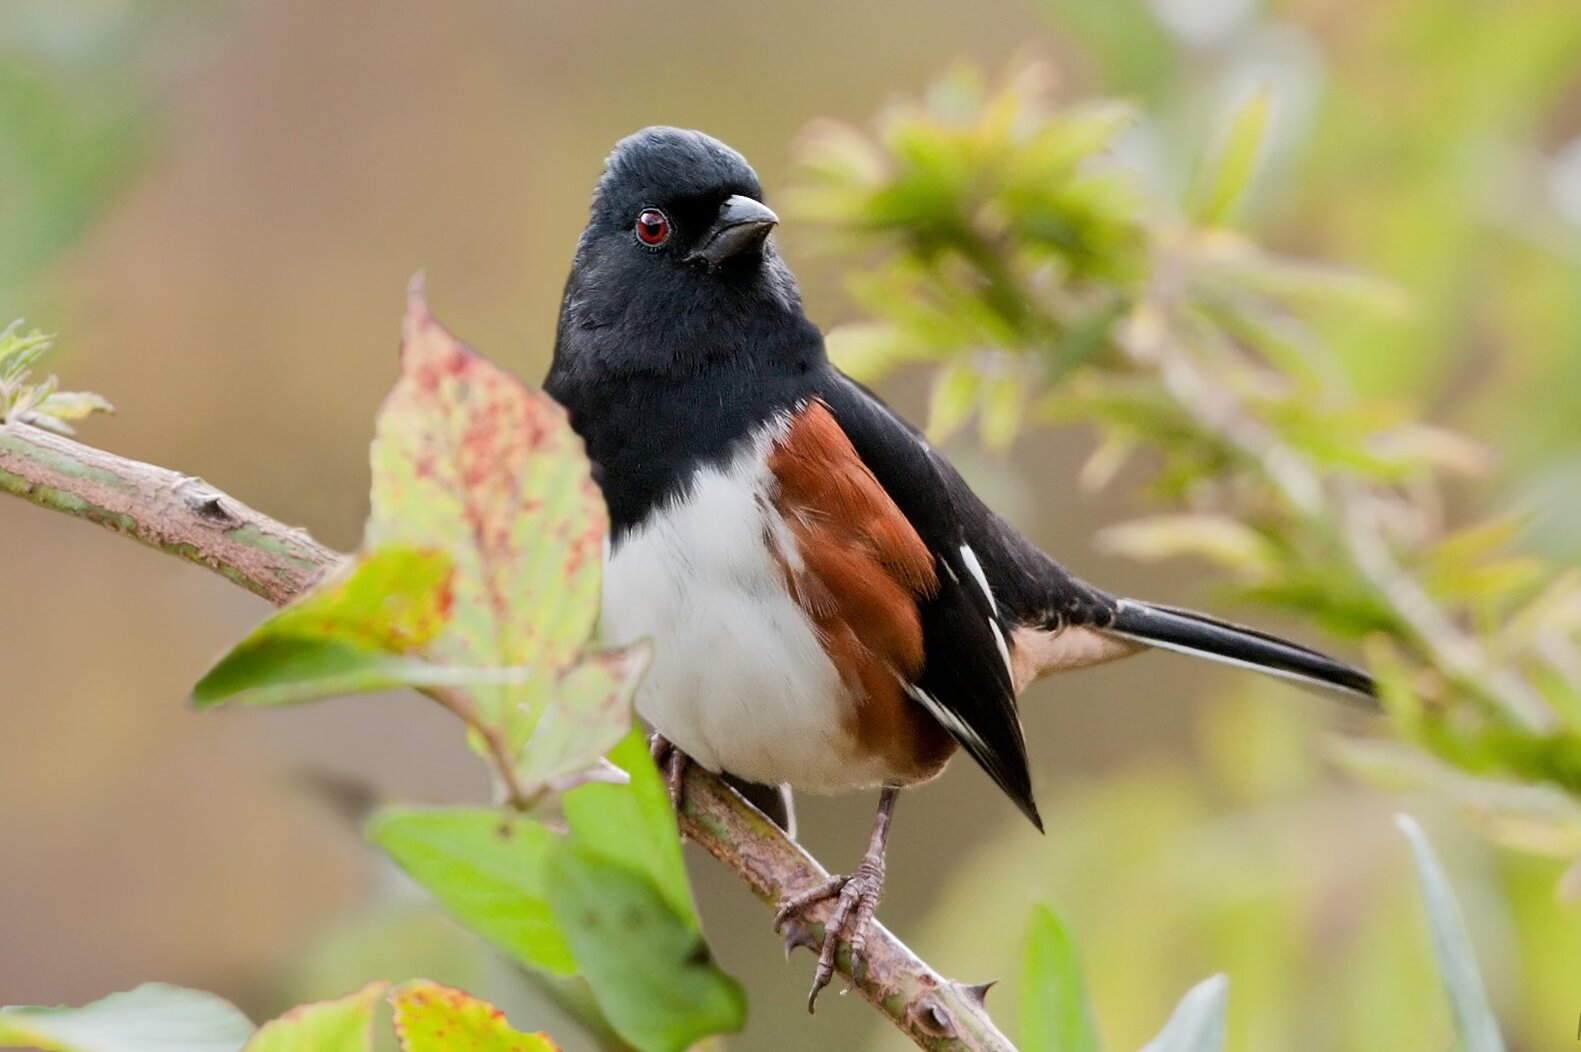 The "Drink your tea!" song of the male Eastern Towhee may be heard in Pelham Bay Park during nesting season. Photo: Kelly Colgan Azar/CC BY-ND 2.0